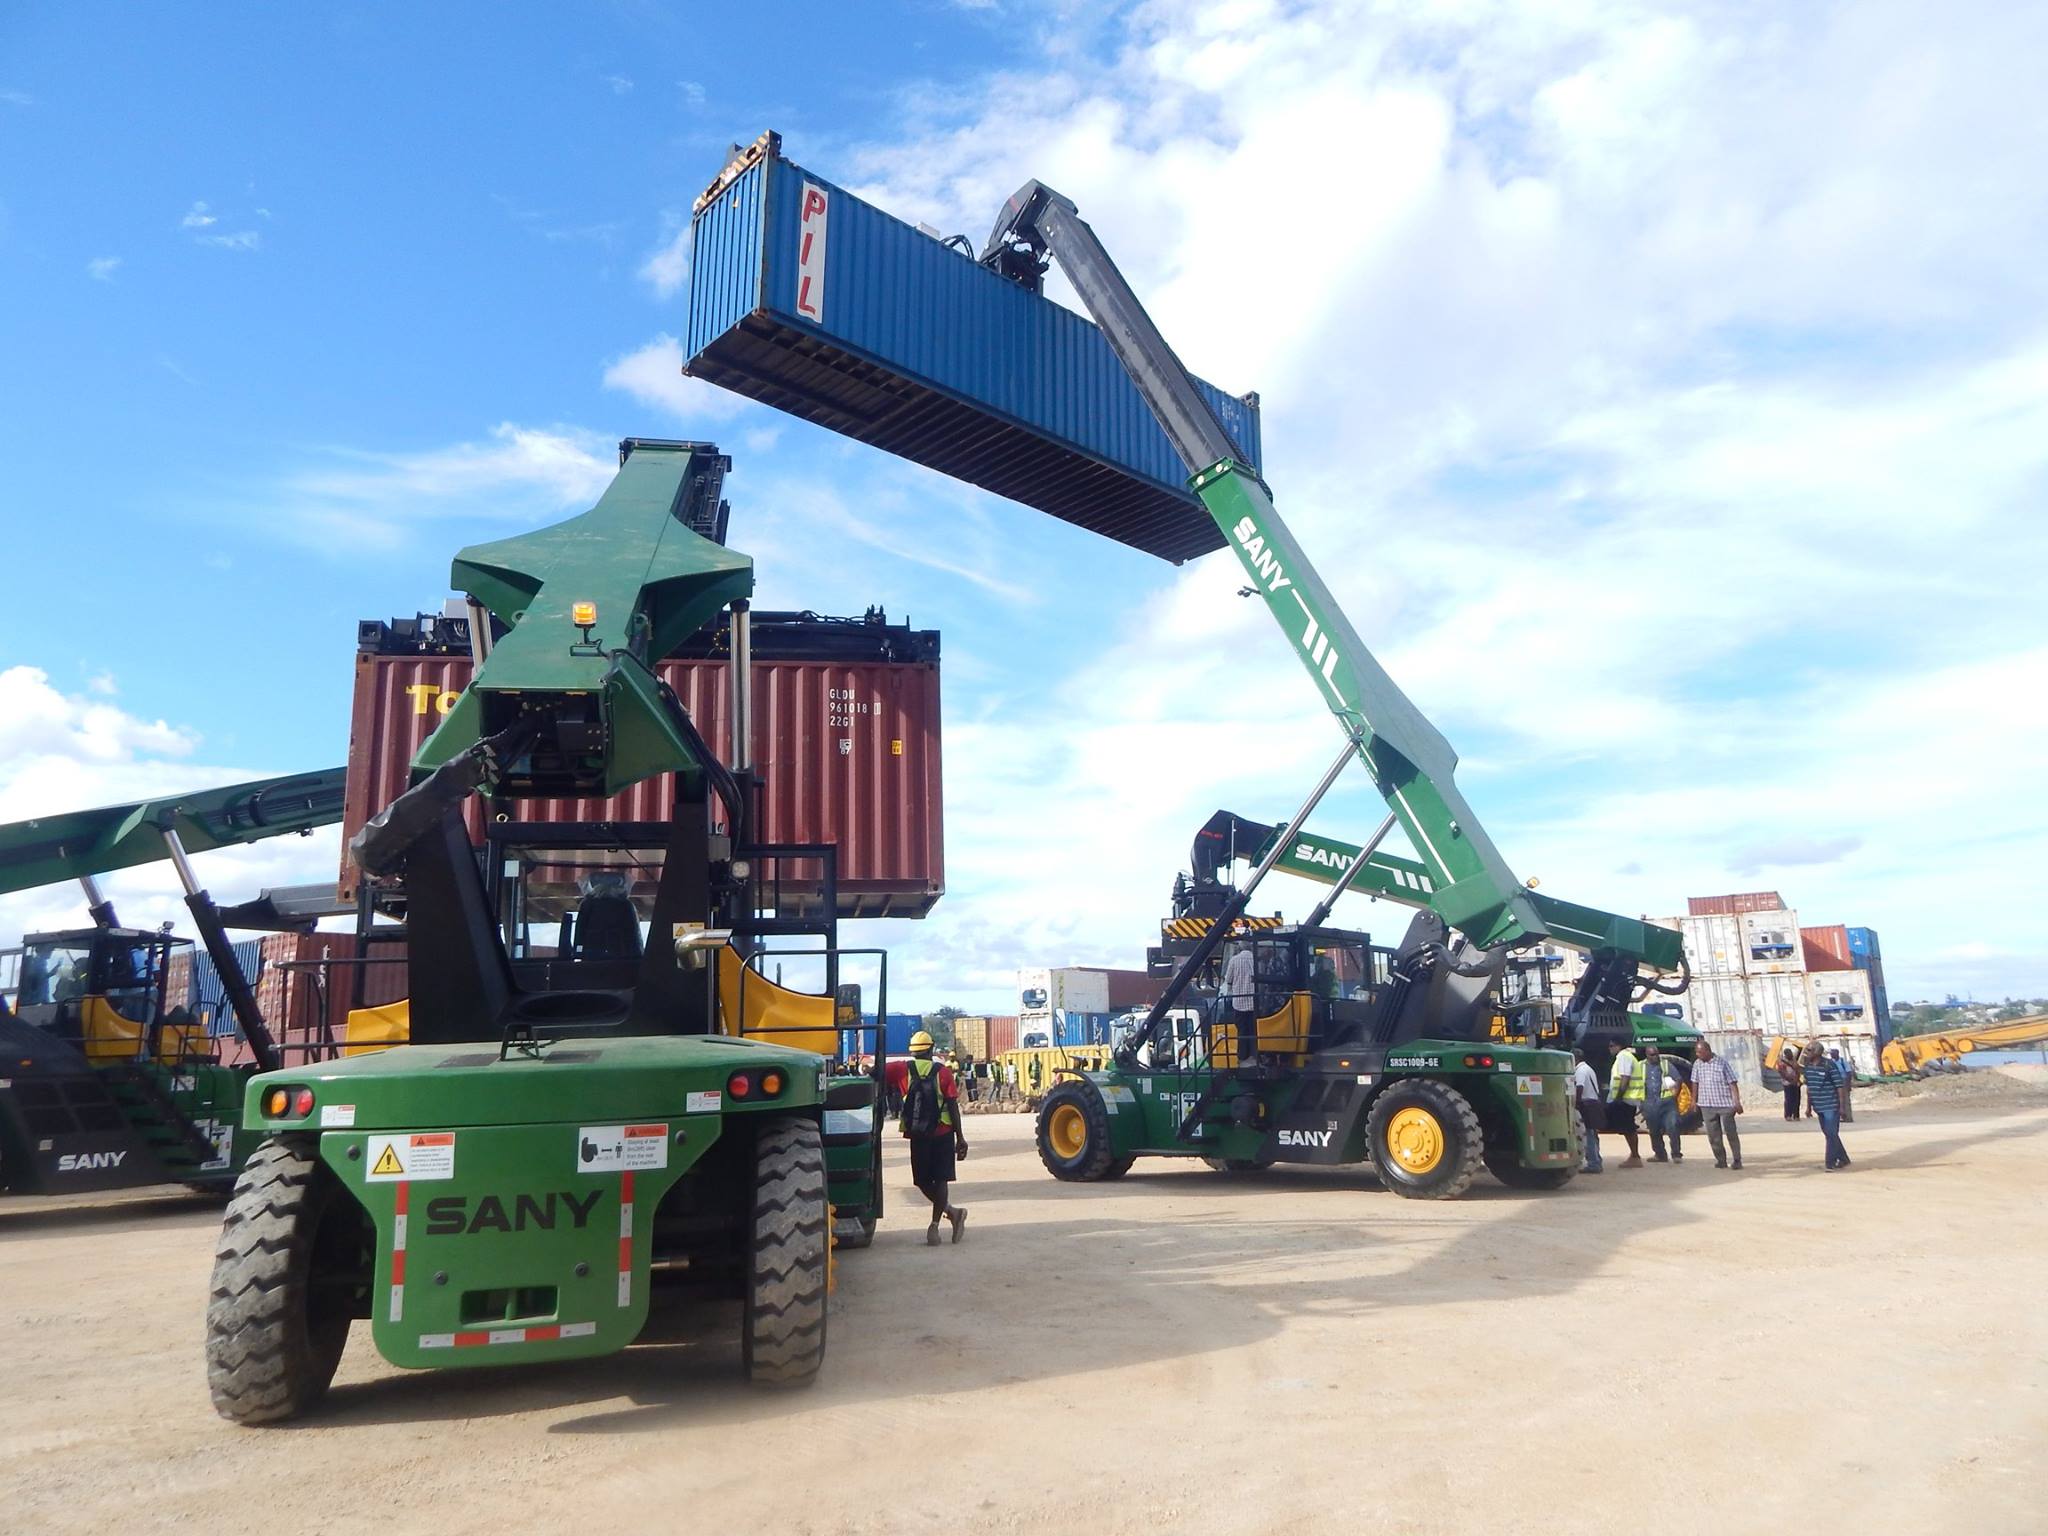 New reach stackers to ease container handling